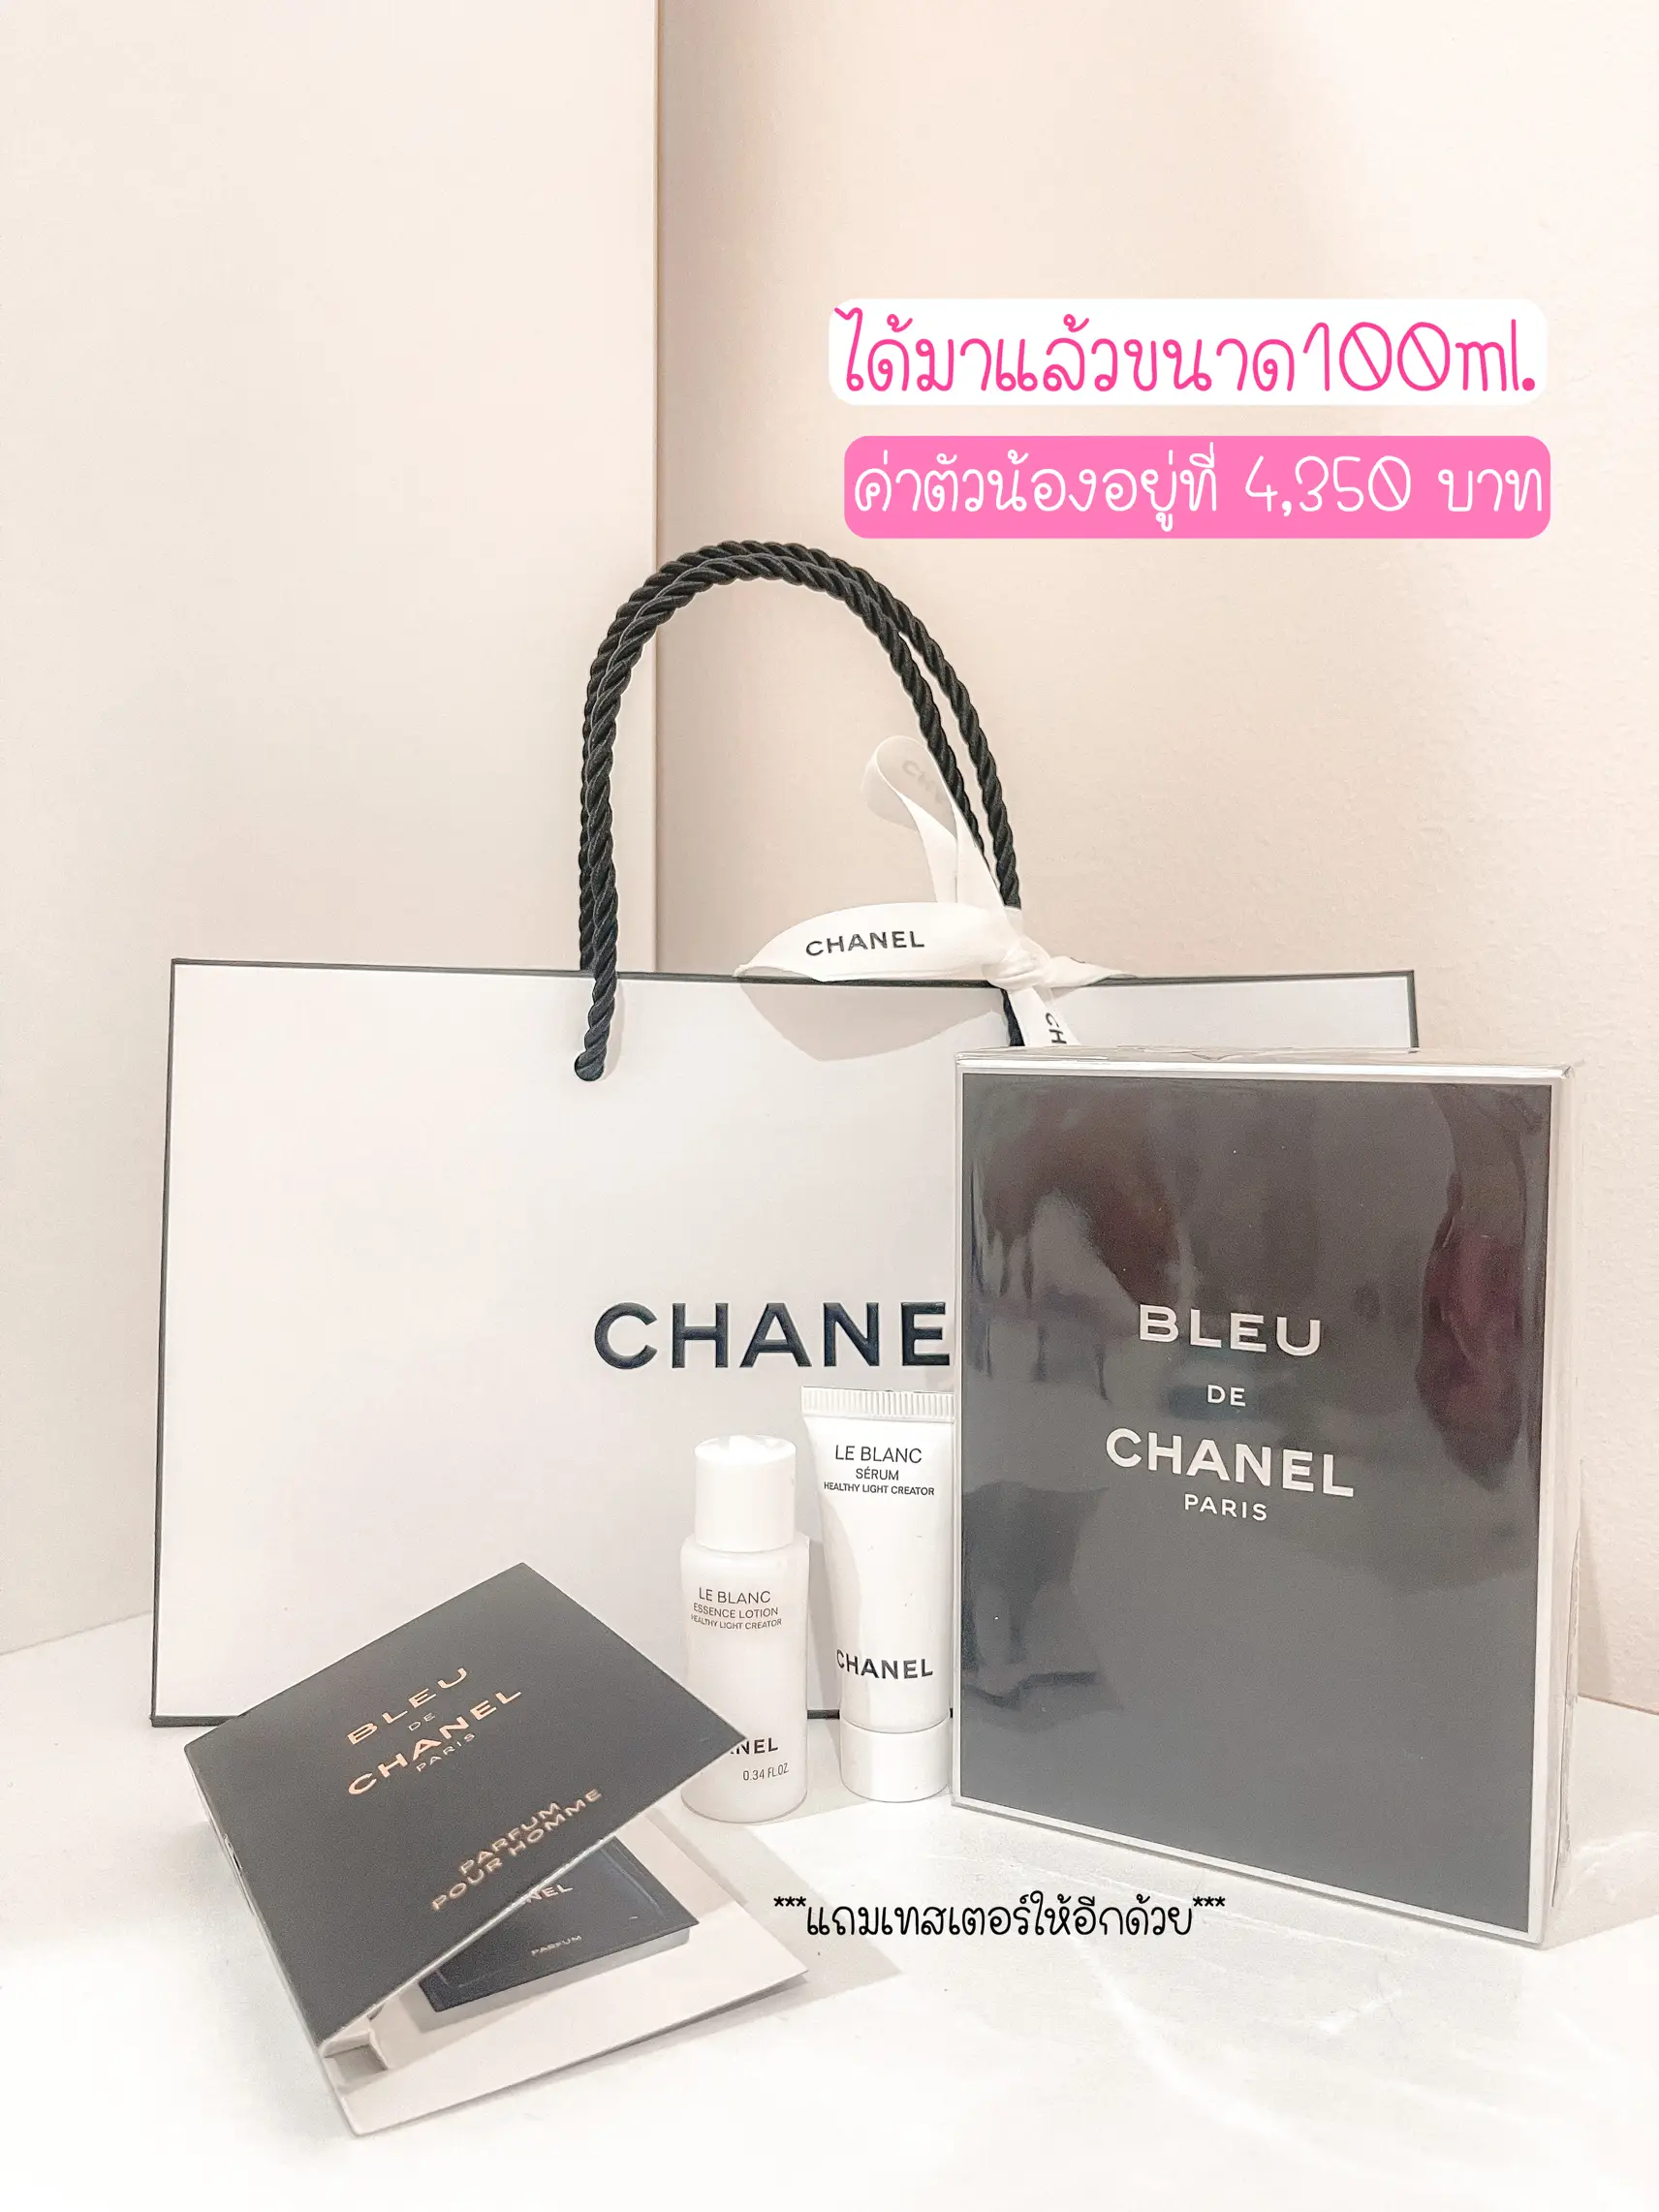 BLEU DE CHANEL PERFUME MUST HAVE🤍, Gallery posted by - ɪᴠʏᴋᴜᴍᴀ🐻